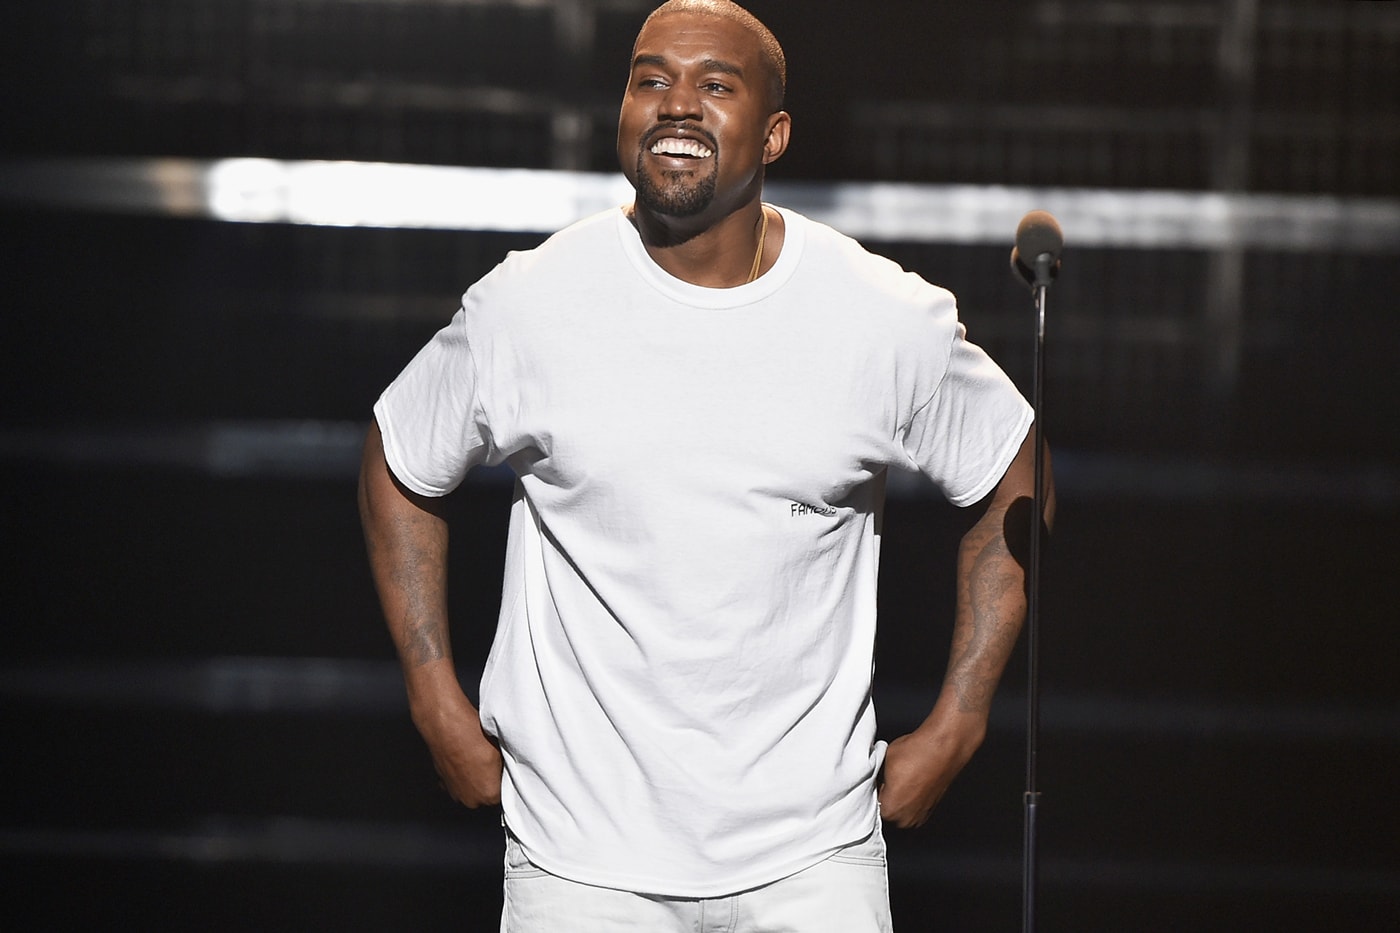 kanye-west-performing-two-shows-in-nyc-tonight-after-governors-ball